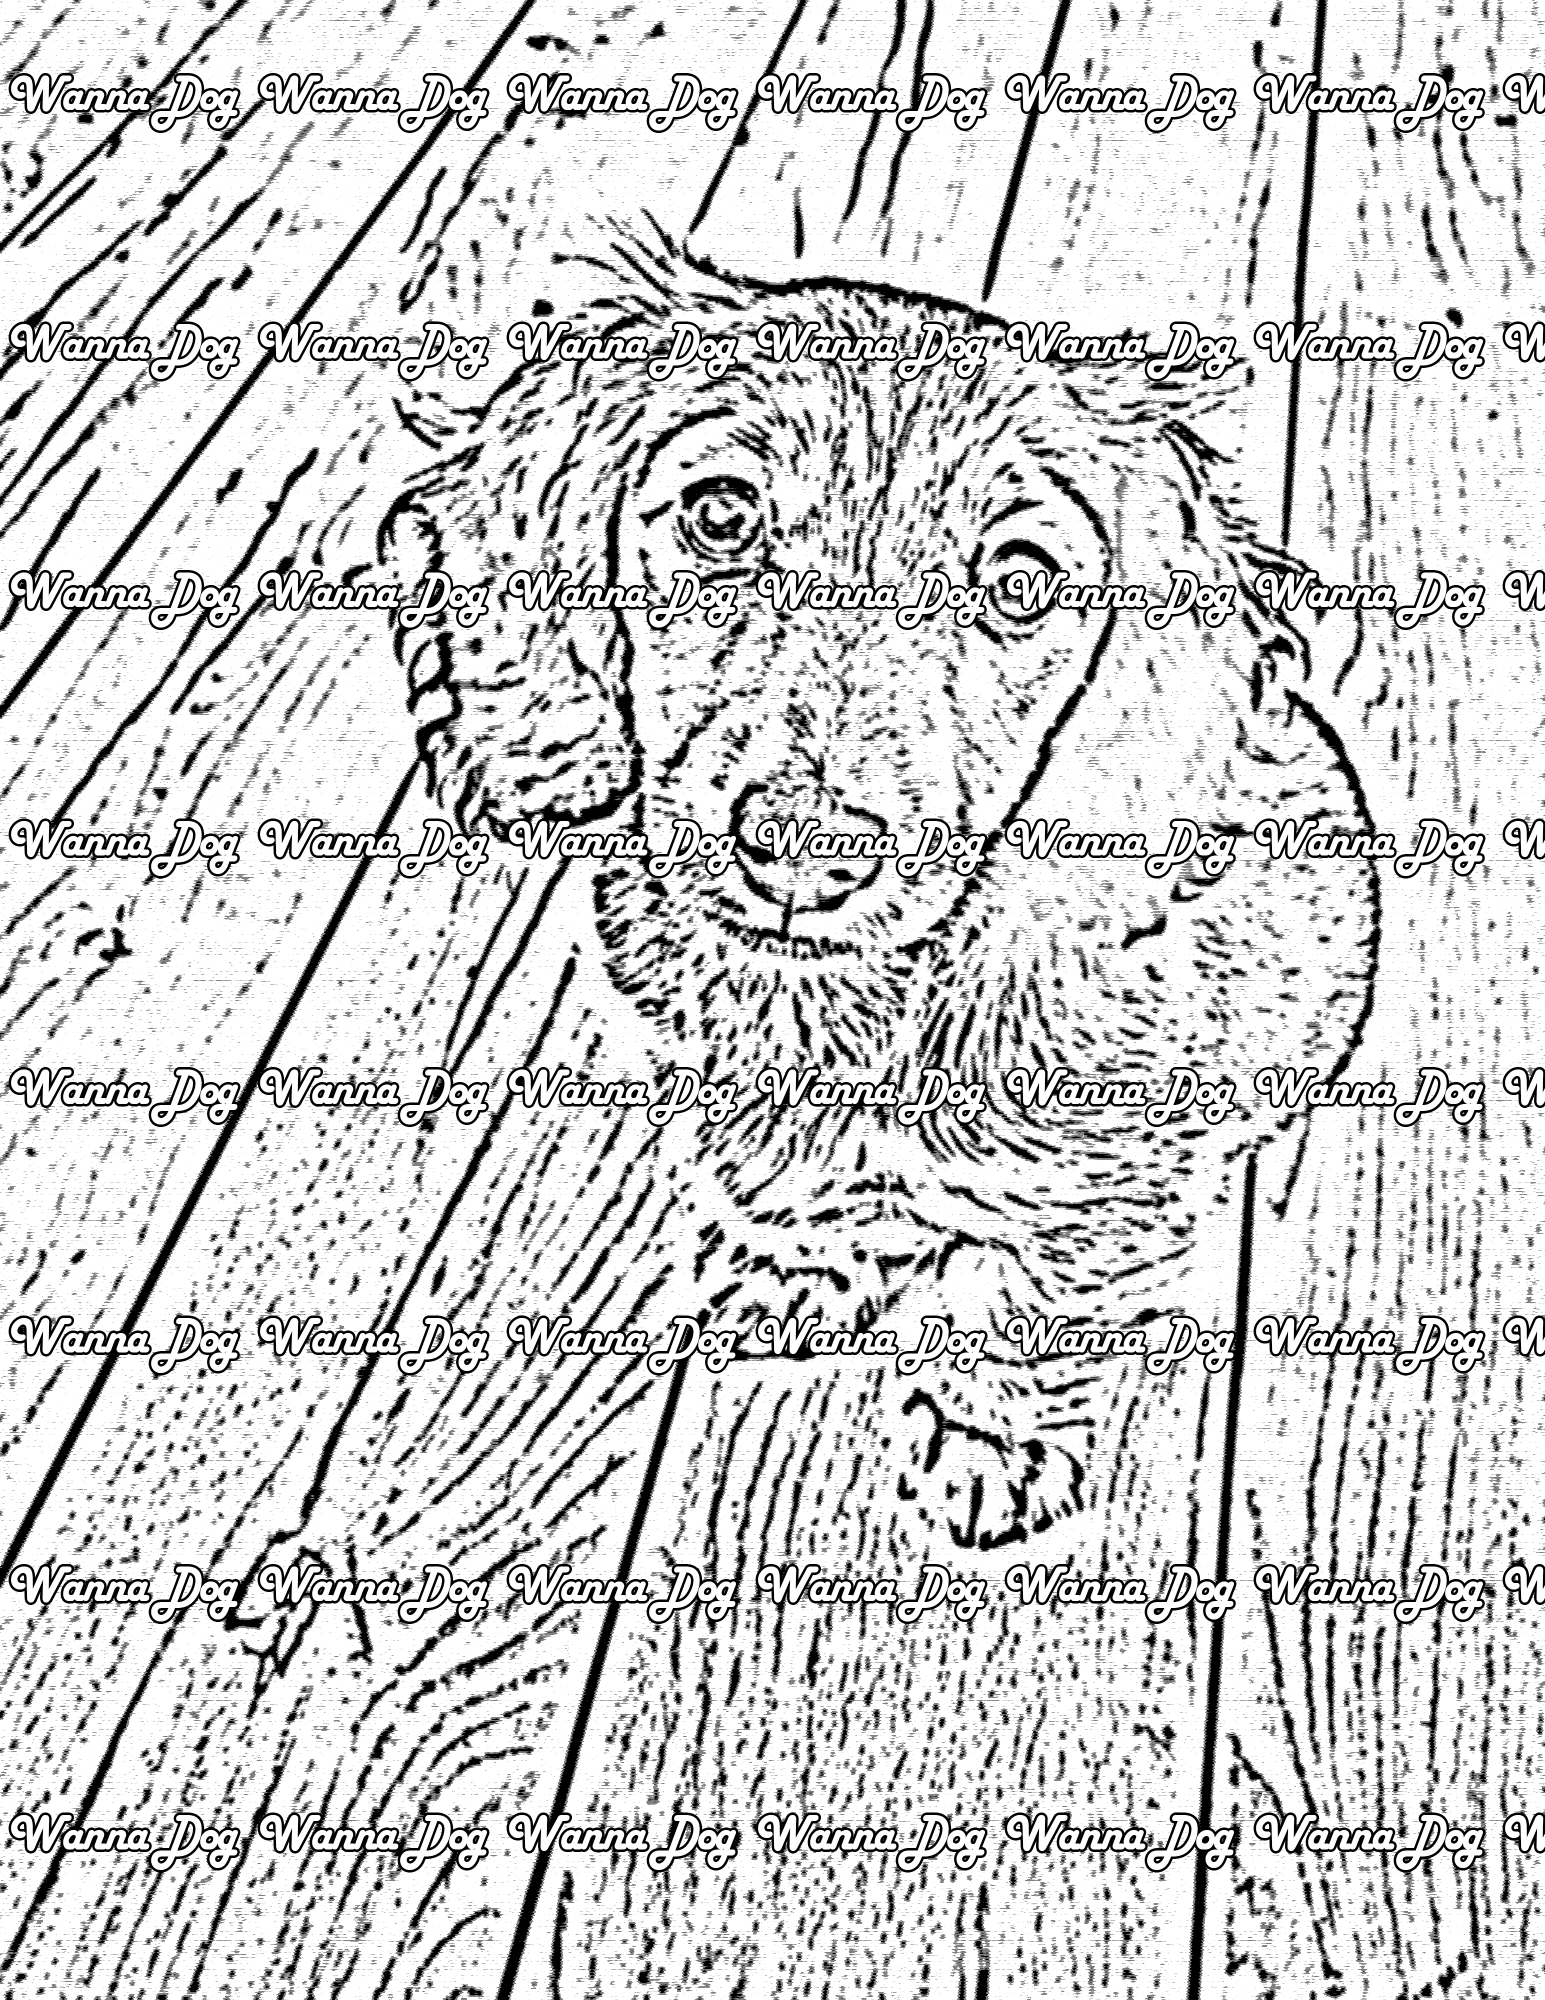 Dachshund Coloring Page of a Dachshund looking up